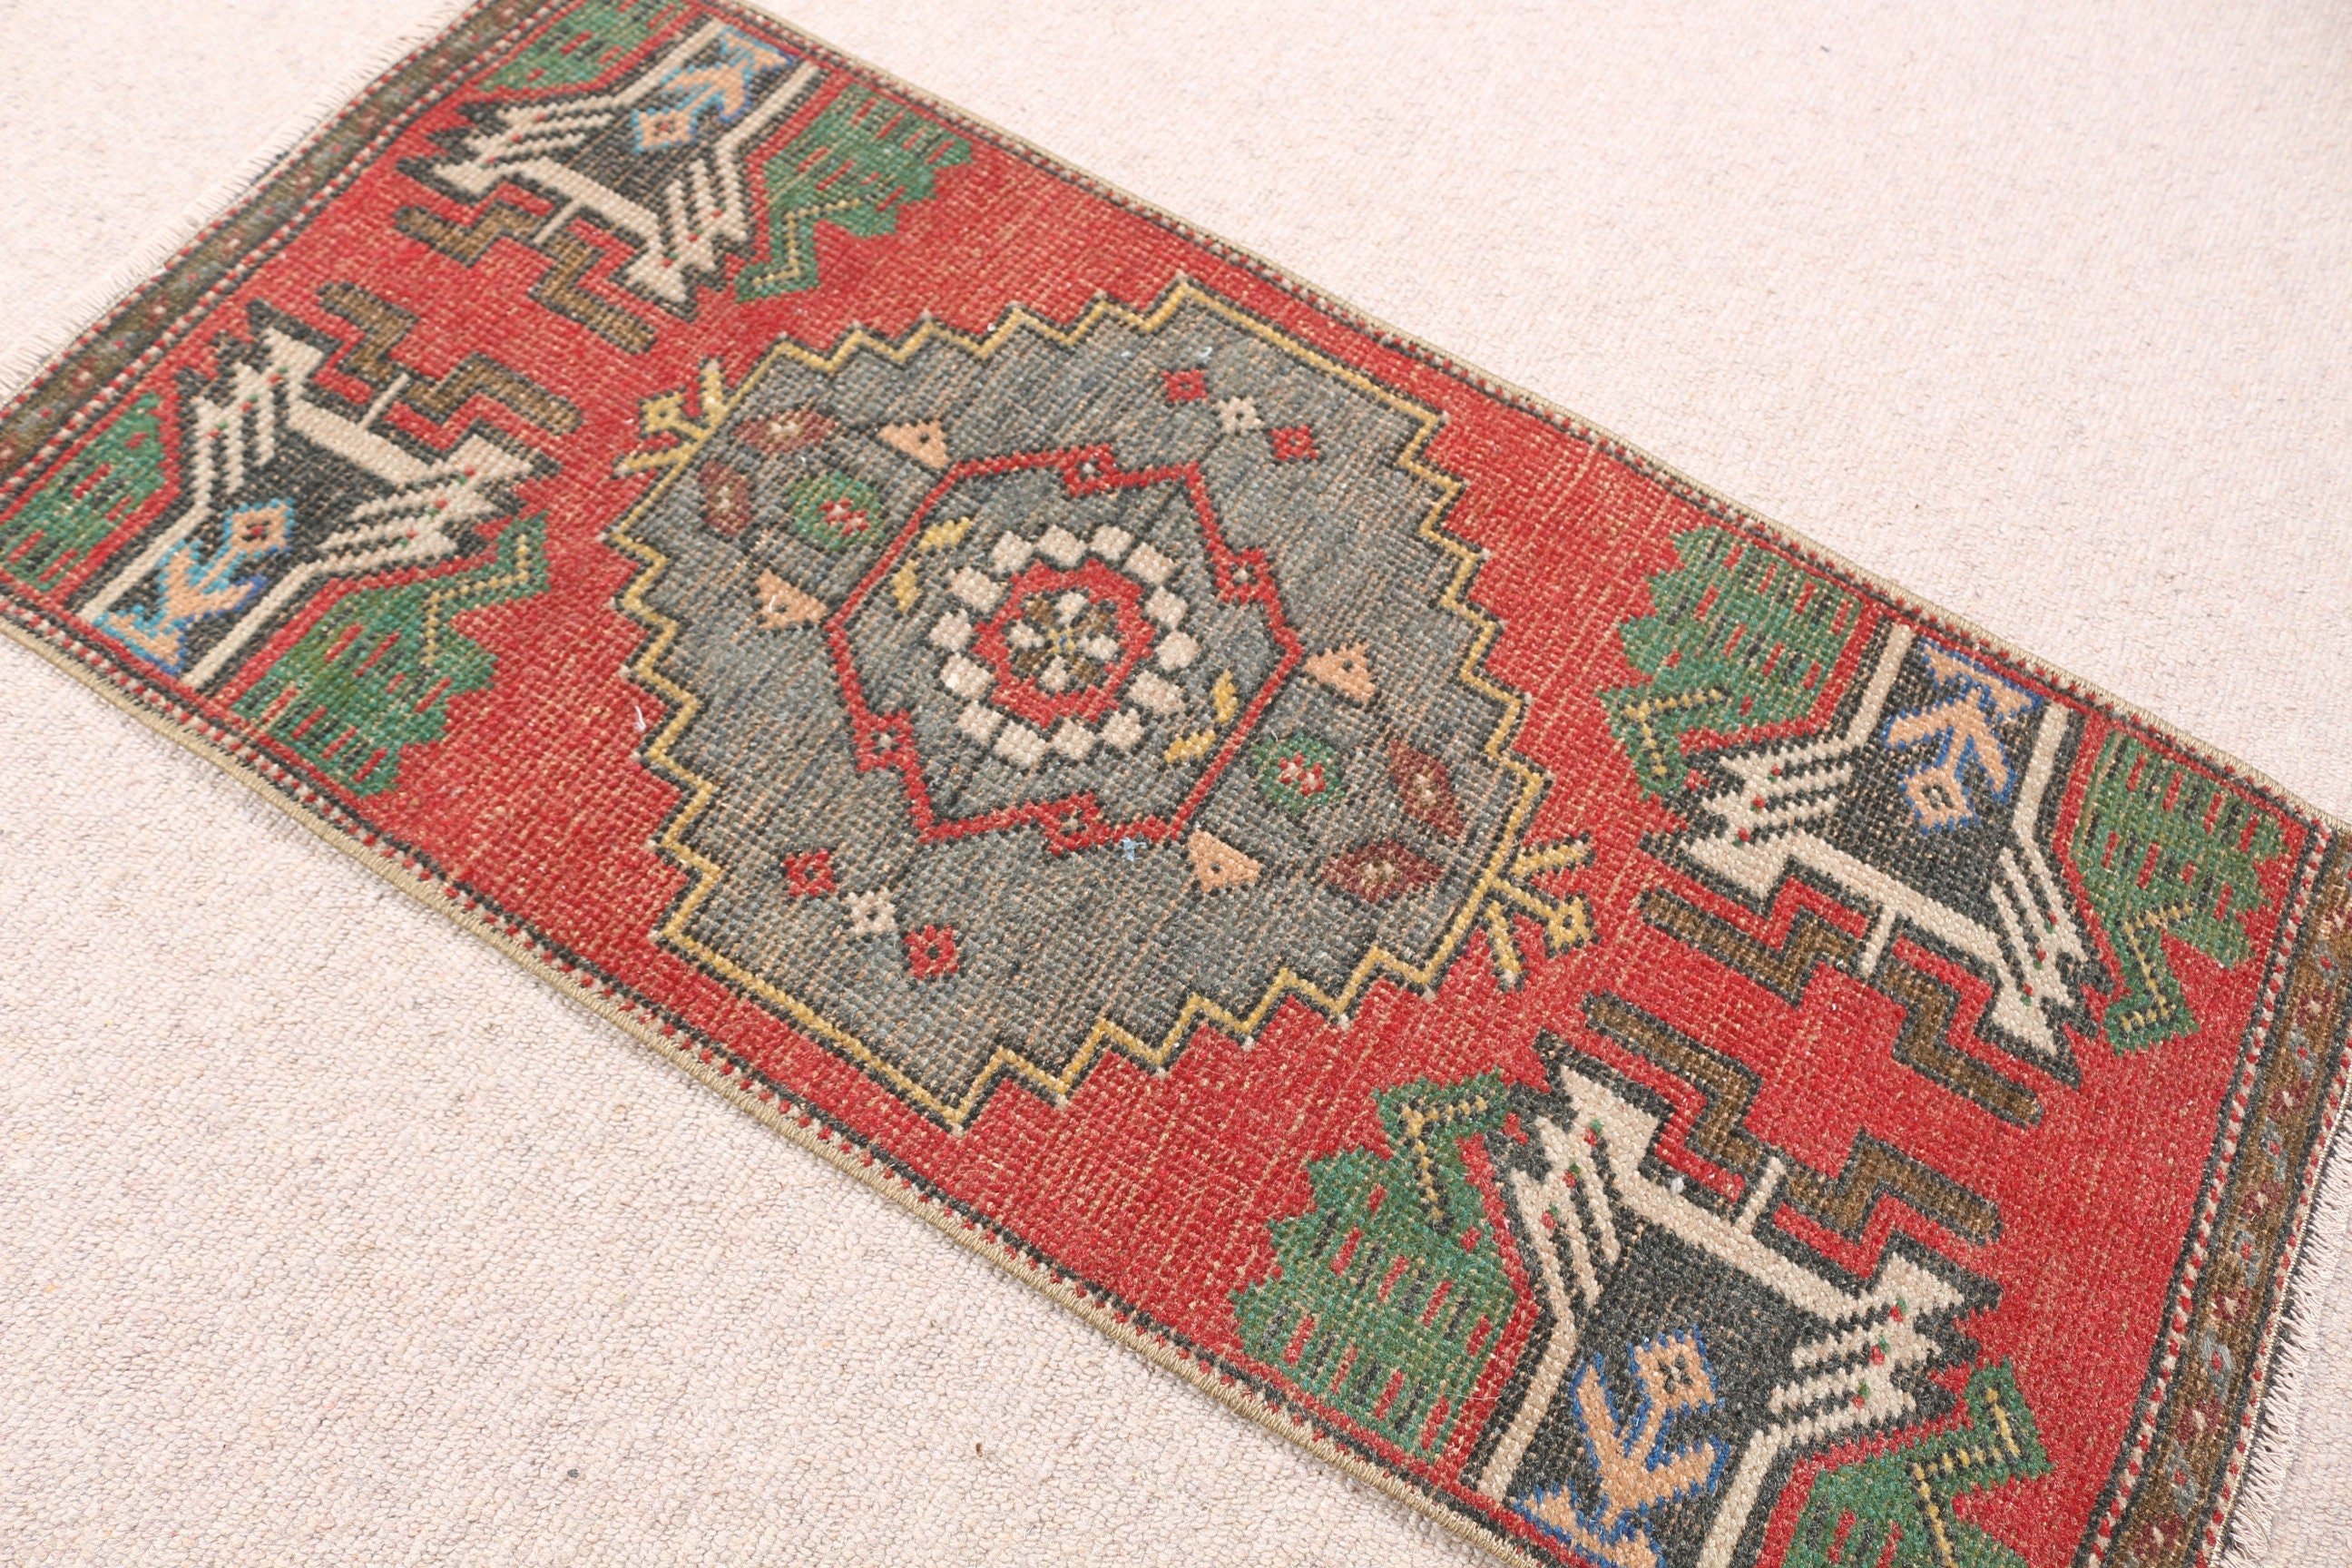 Oushak Rugs, Kitchen Rug, Vintage Rugs, 1.4x3.1 ft Small Rug, Rugs for Nursery, Oriental Rug, Red Anatolian Rug, Turkish Rug, Entry Rugs